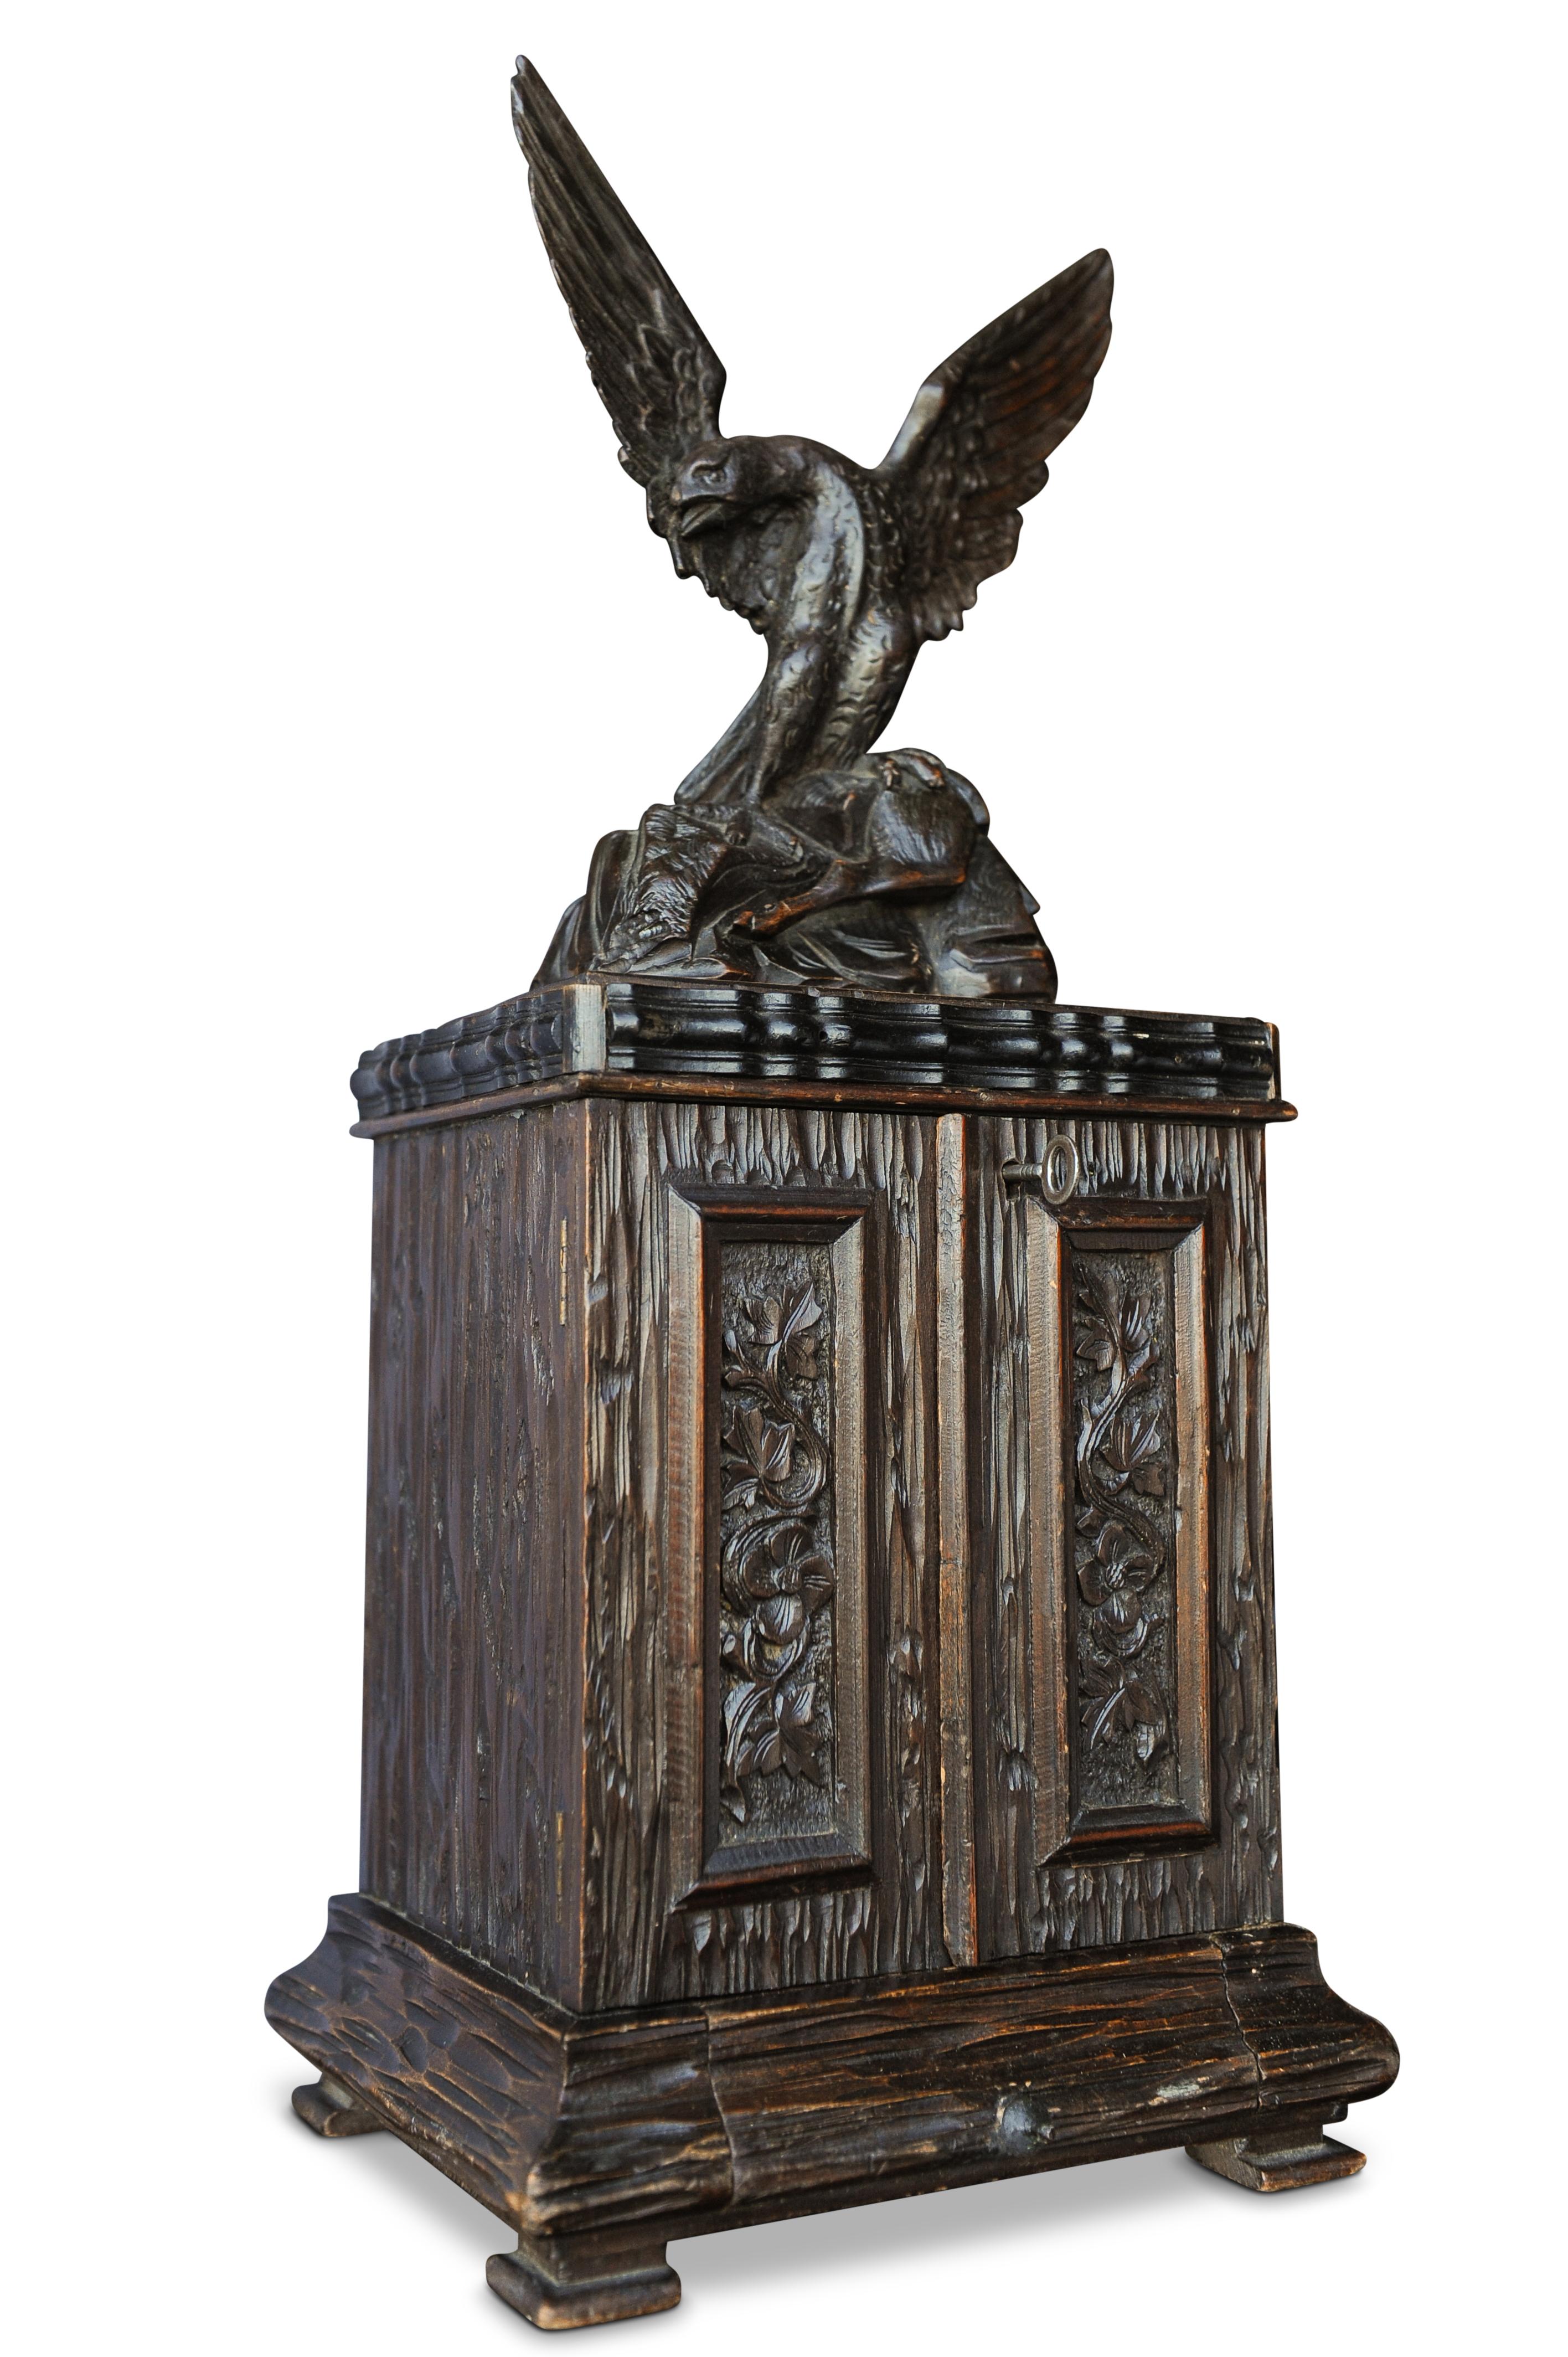 Swiss Exquisite 19th Century Black Forest Humidor Hand Carved Cabinet Eagle Mounted  For Sale